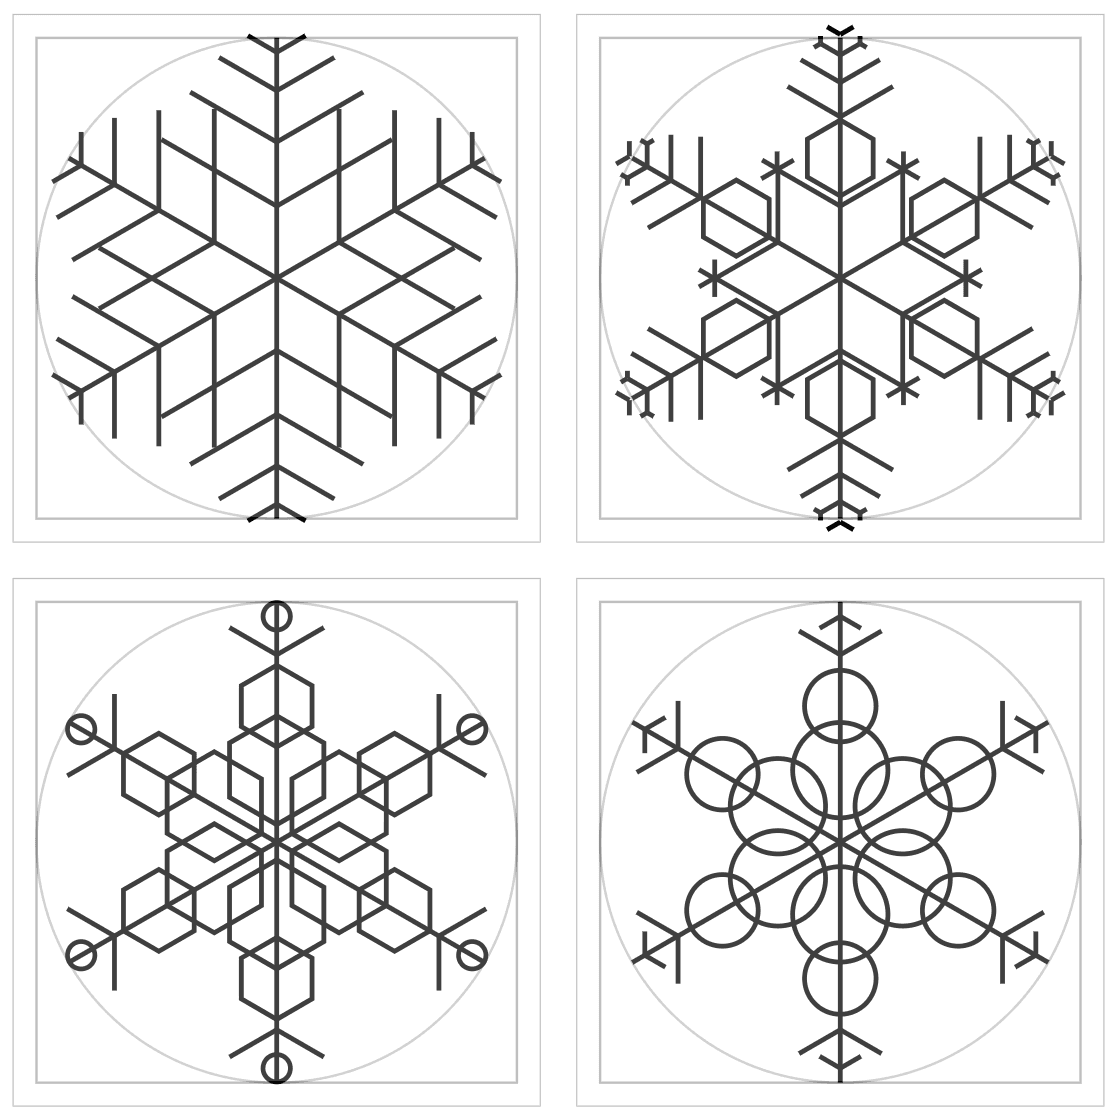 A screenshot from a computer showing the digital versions of four snowflake shapes